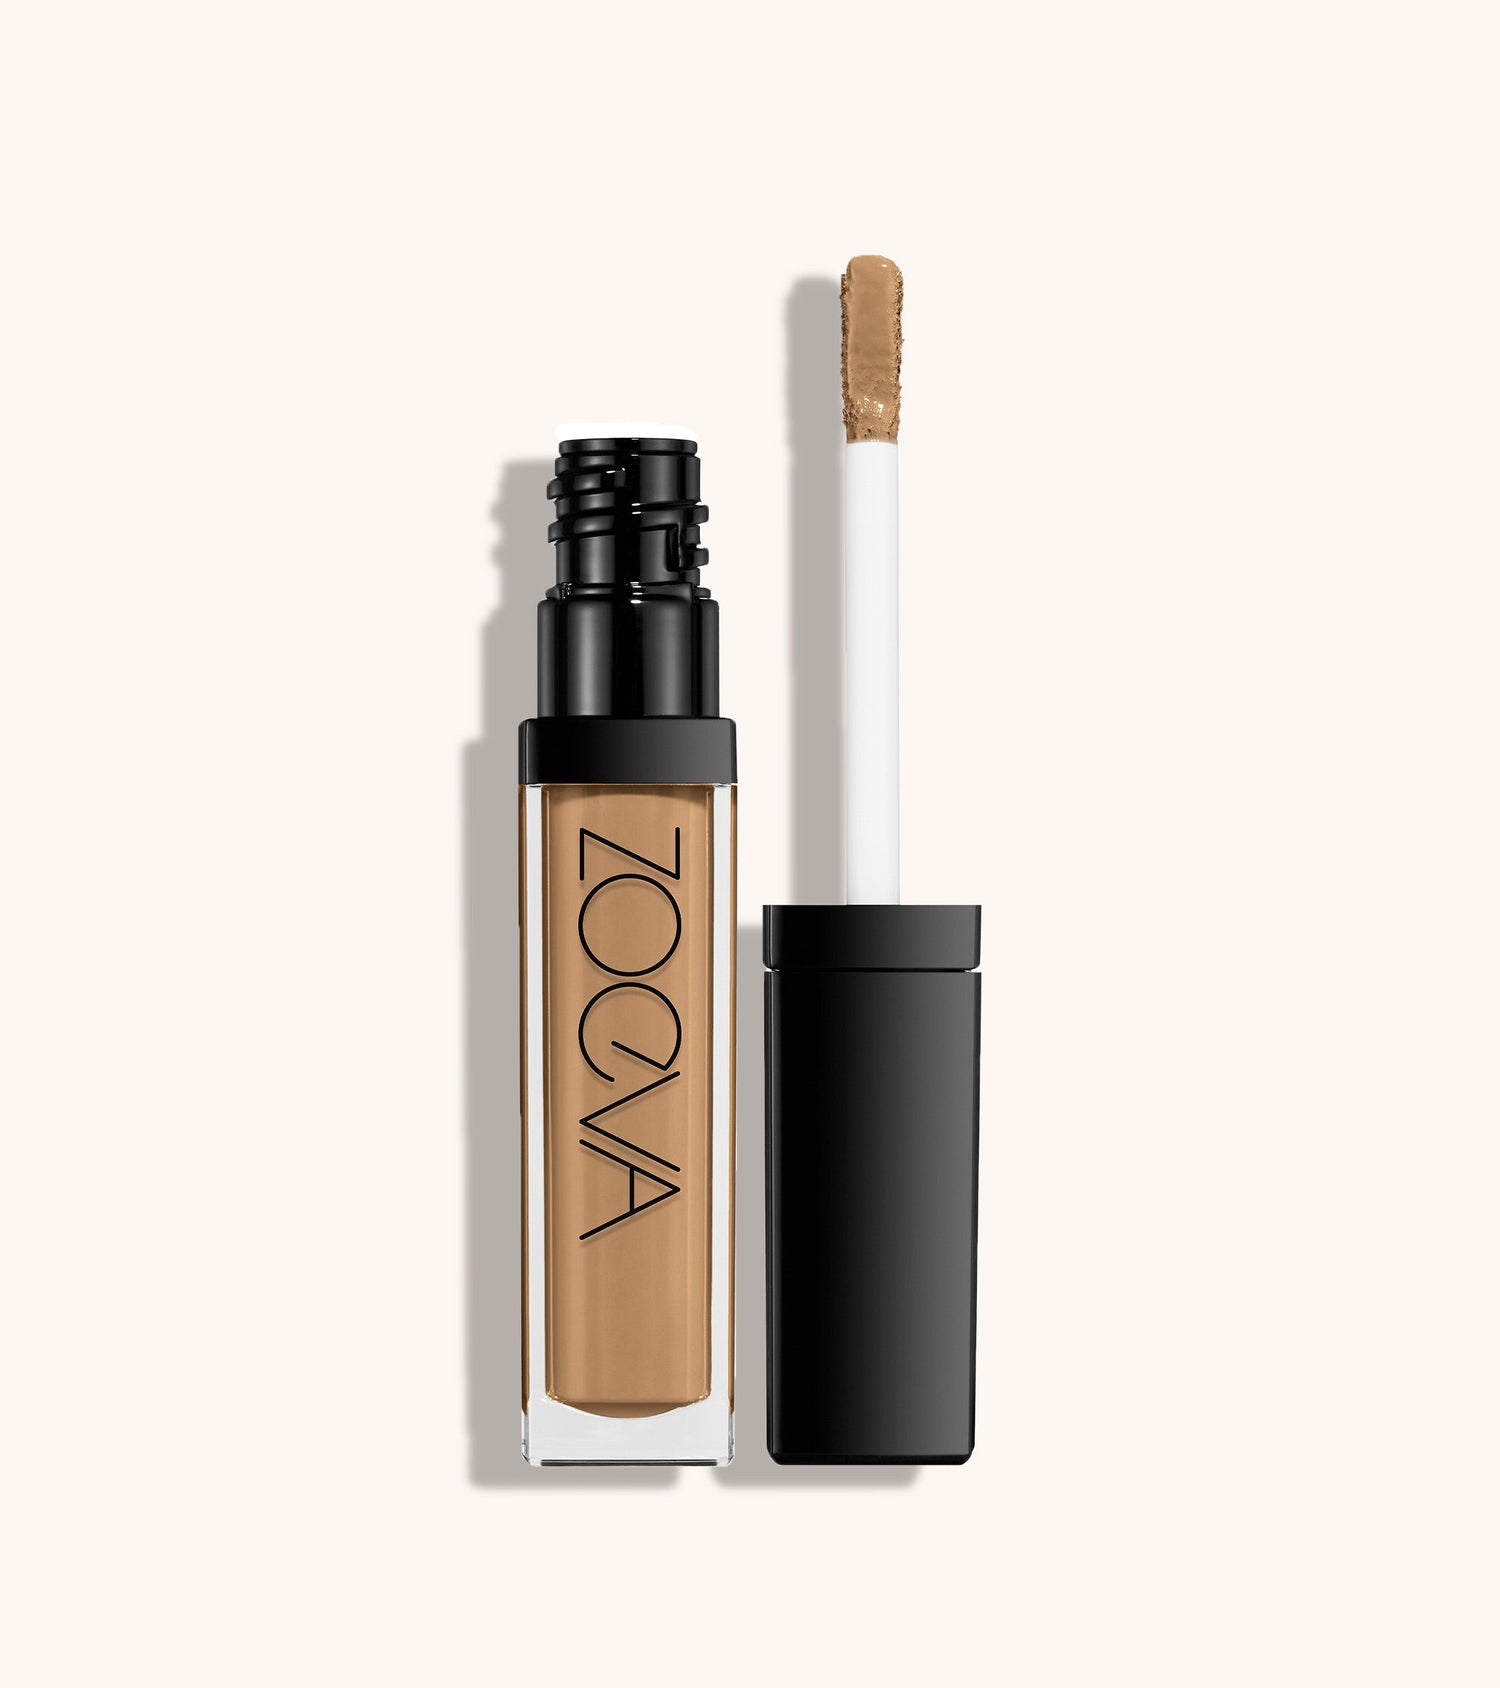 Authentik Skin Perfector Concealer (190 Positive) Main Image featured